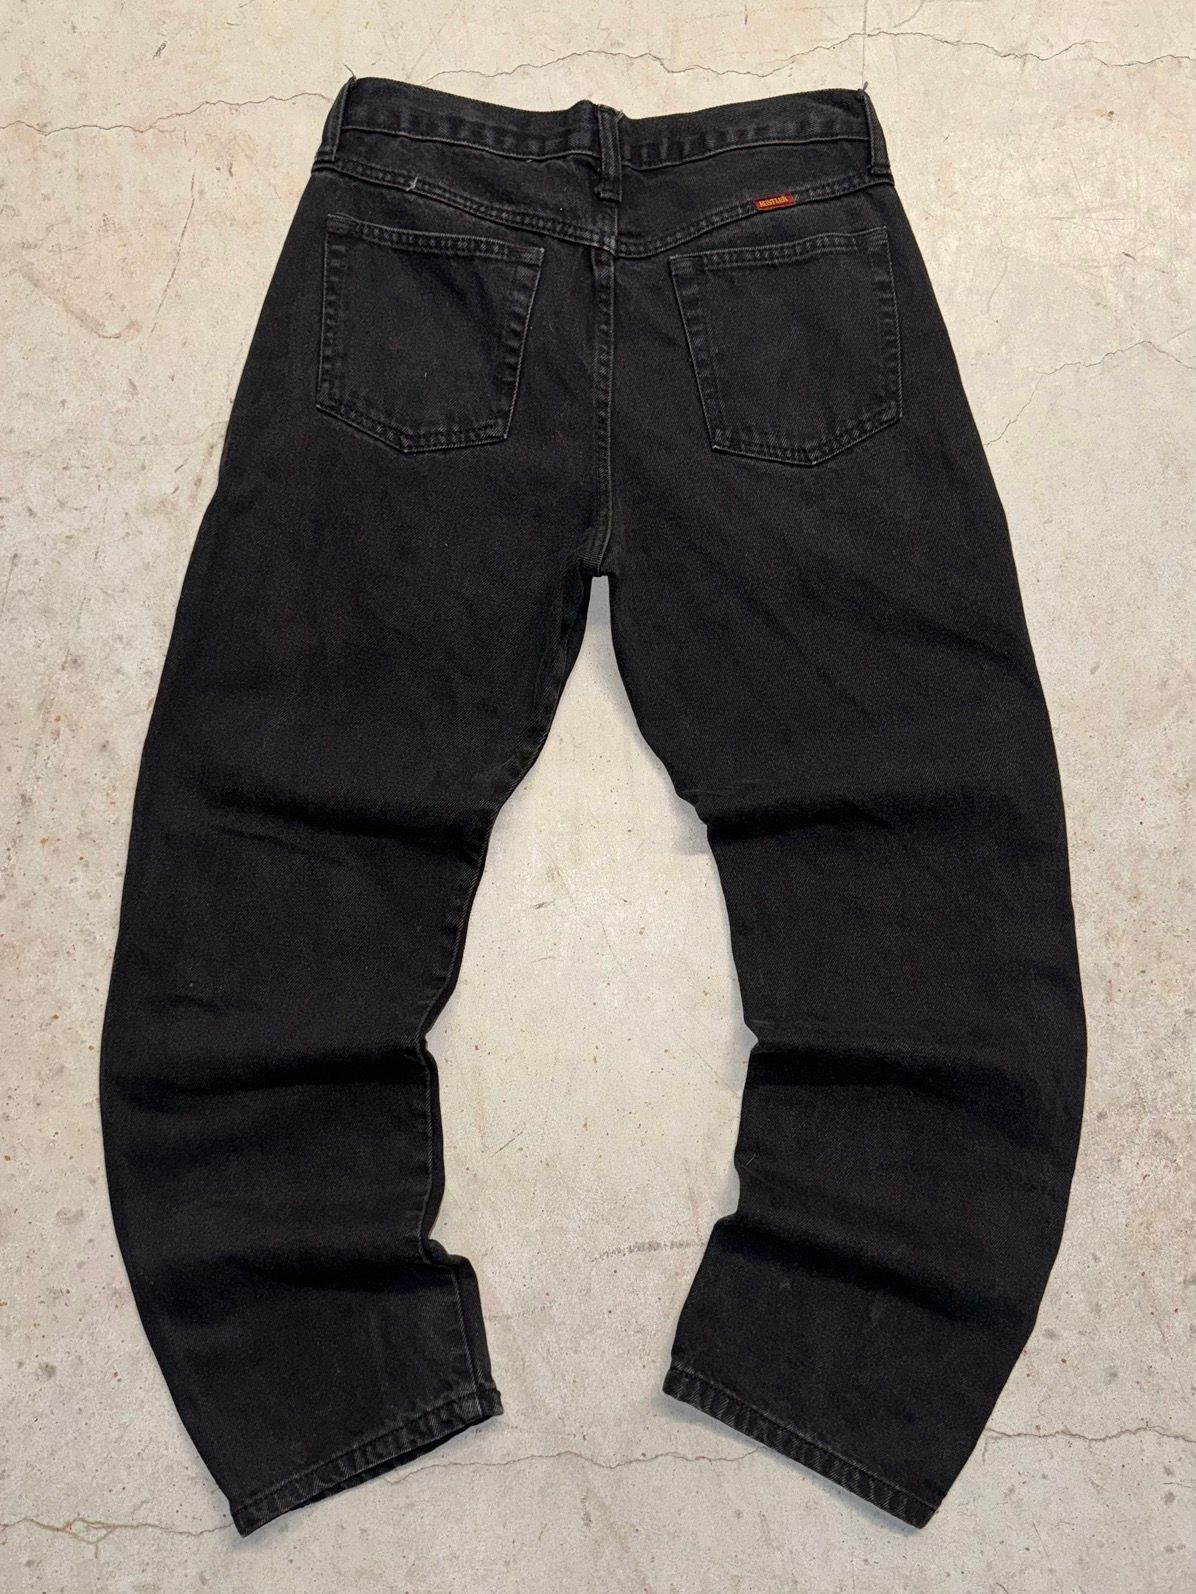 Vintage Crazy Vintage 90s Carhartt Style Faded Black Baggy Jeans Size US 31 - 4 Thumbnail